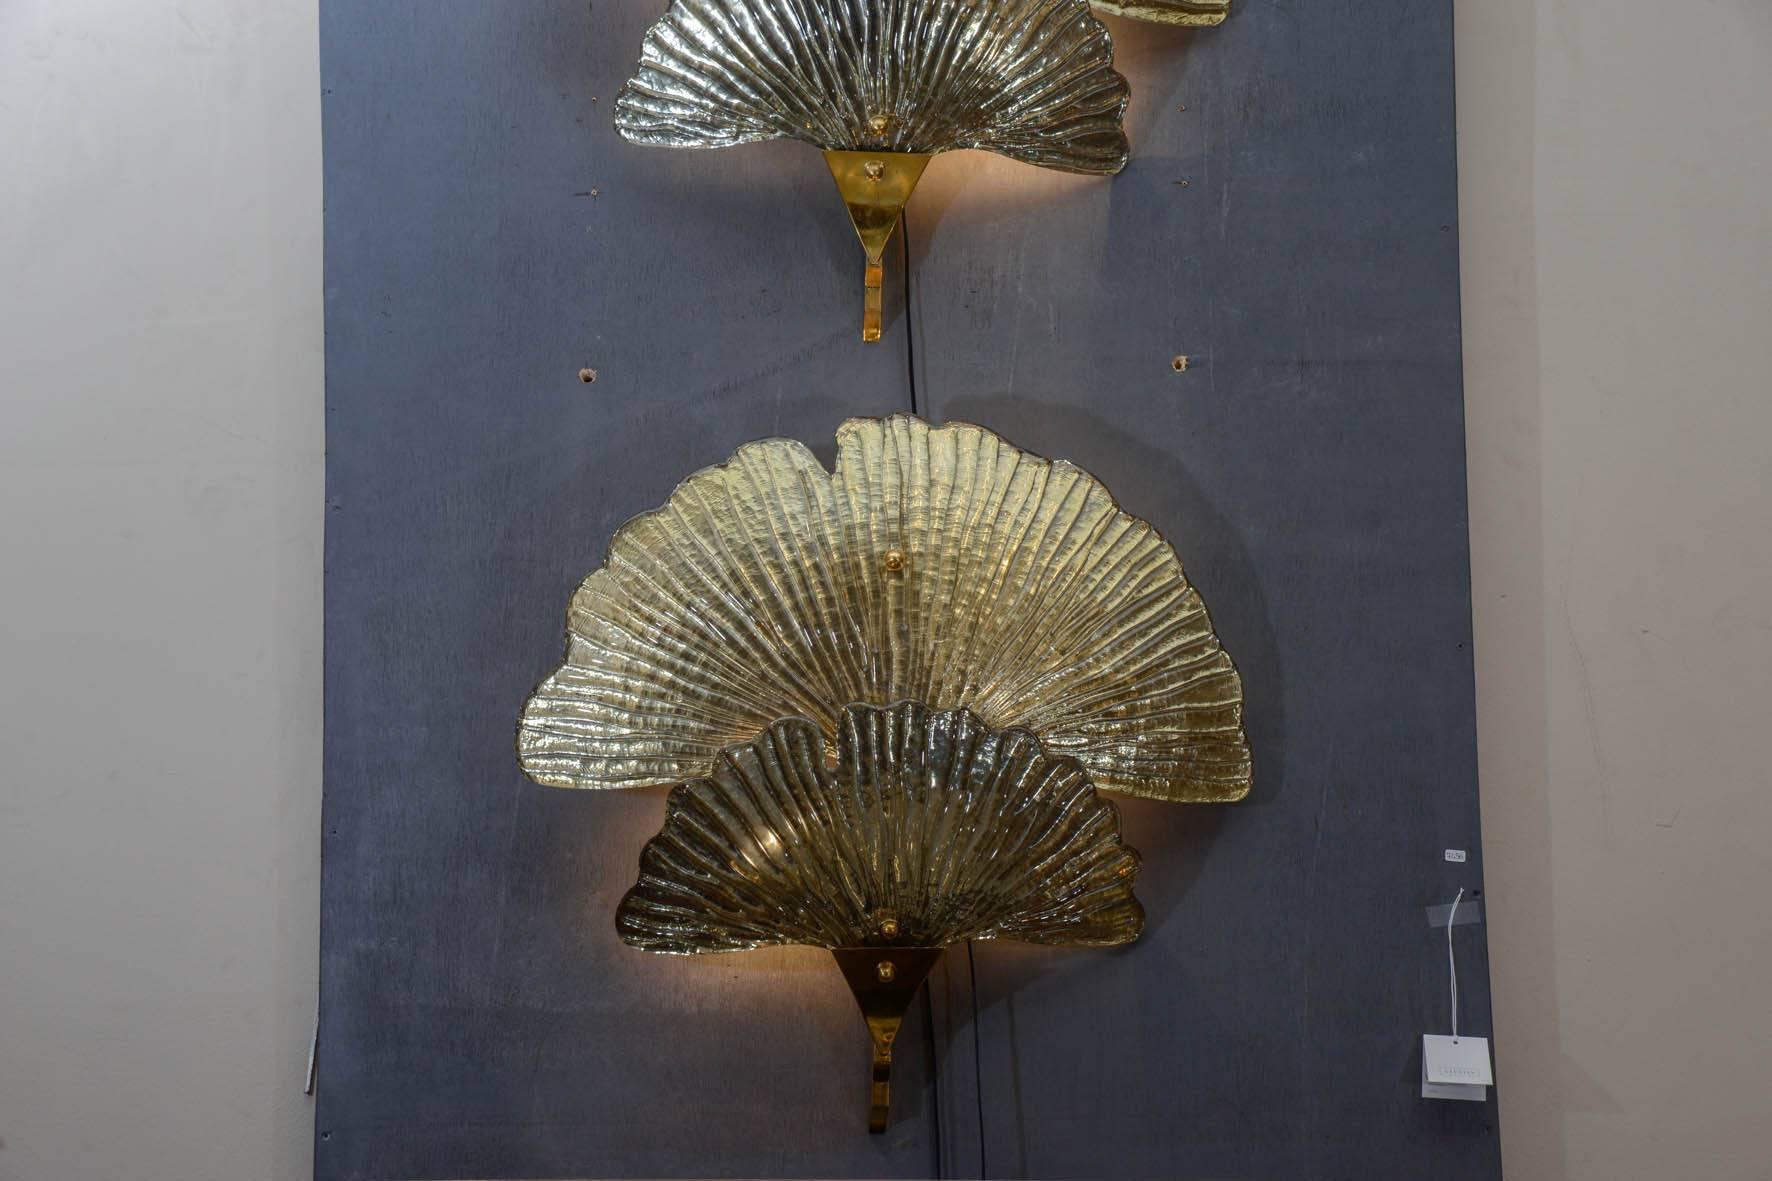 Pair of gilt and silvered Murano glass waterlily sconces, four bulbs per sconce.
Four sconces are available.
4400 euros for one pair.